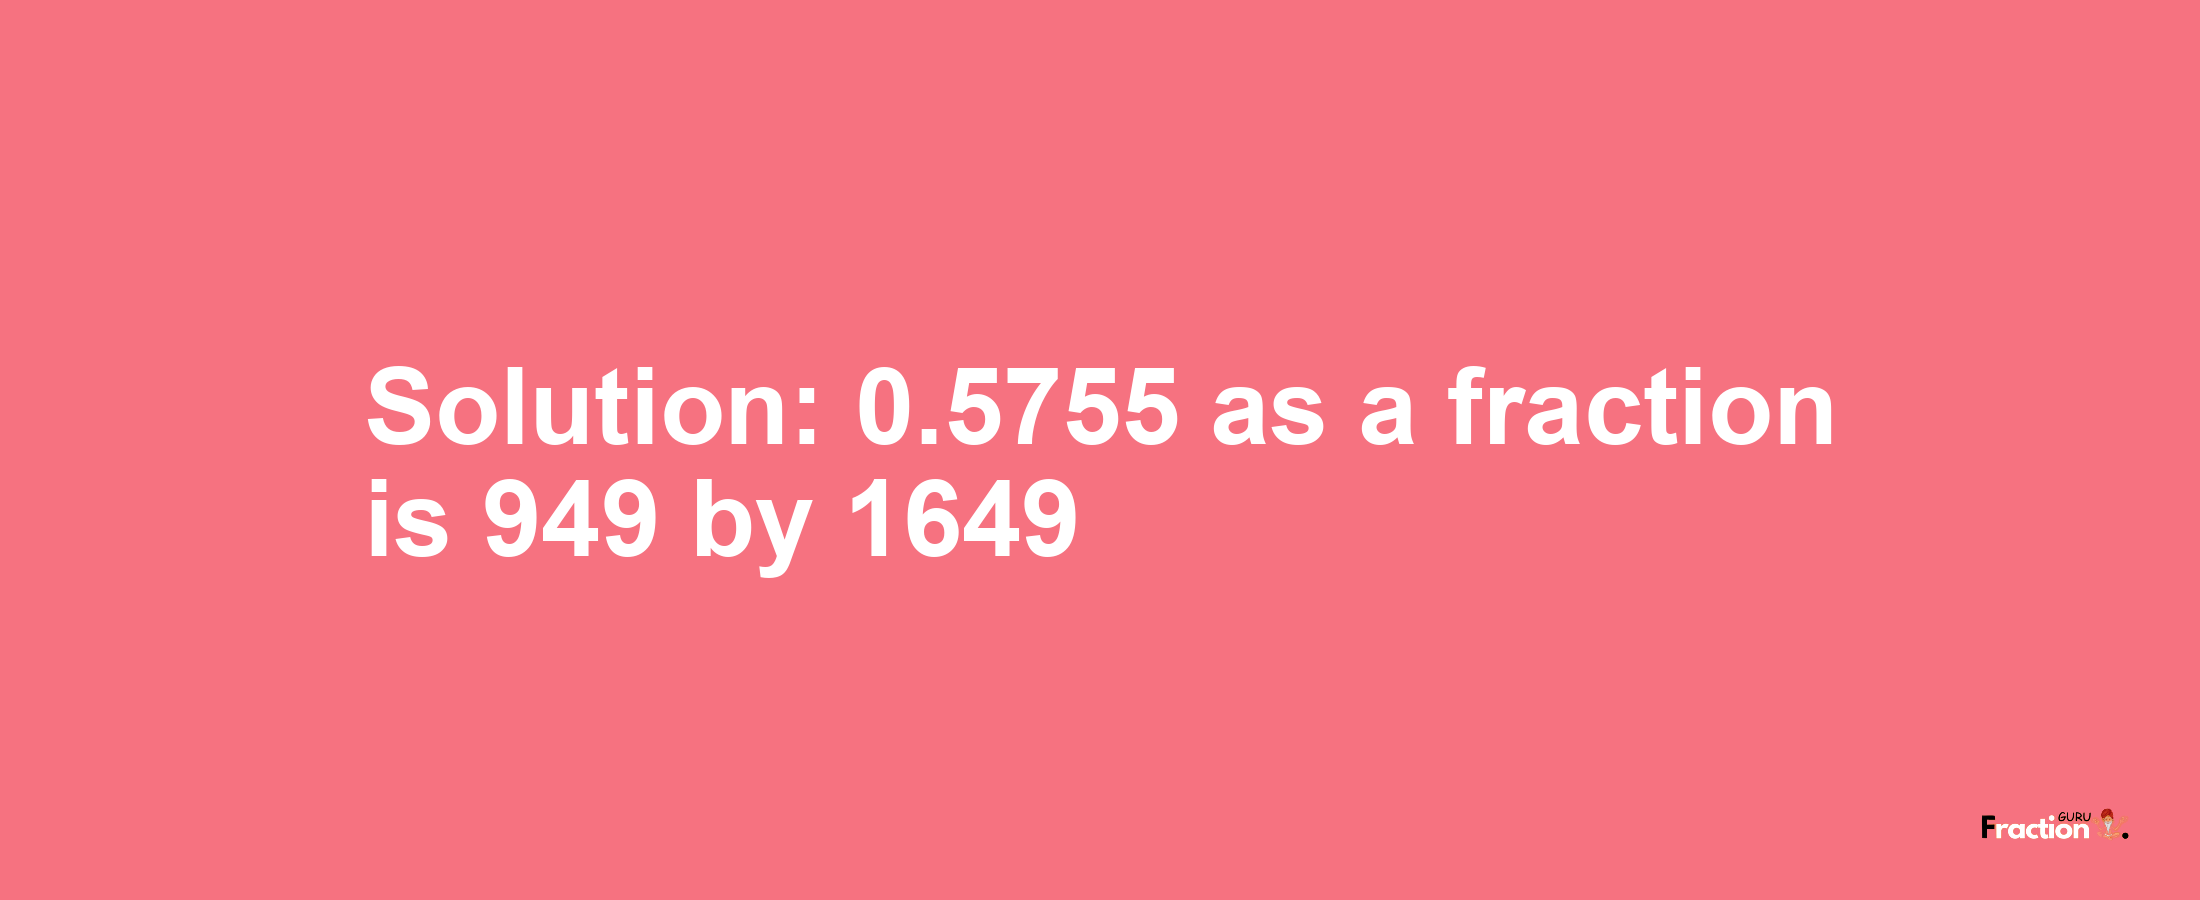 Solution:0.5755 as a fraction is 949/1649